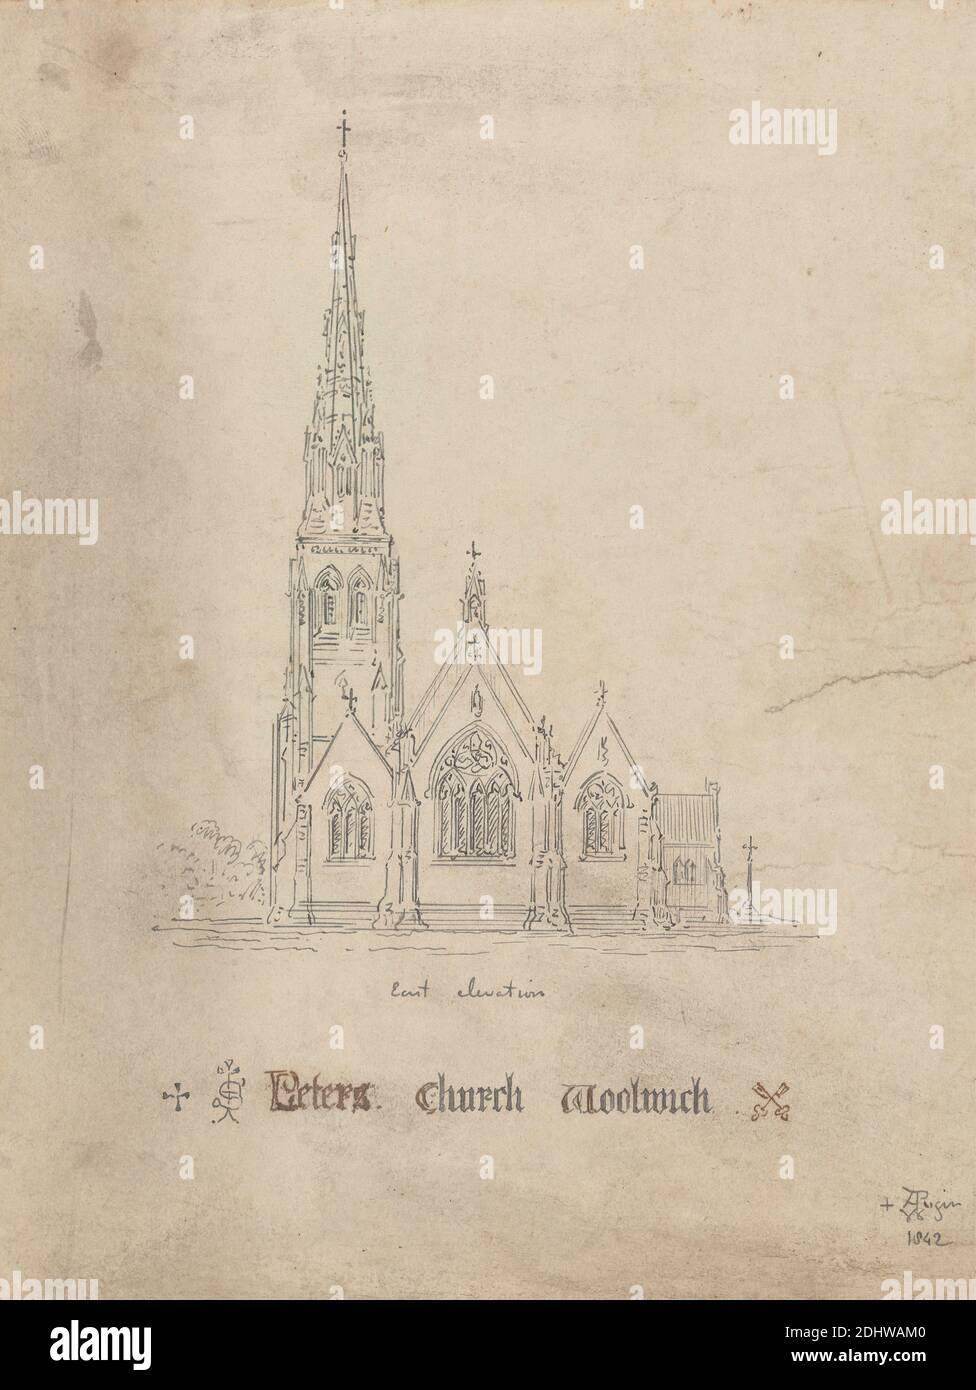 St. Peter's Church, Woolwich, Augustus Welby Northmore Pugin, 1812–1852, British, Augustus Charles Pugin, 1762–1832, French, 1842, Pen and gray ink and pen and brown ink on thick, slightly textured, cream wove paper, Sheet: 7 1/8 x 5 3/8 inches (18.1 x 13.7 cm), architectural subject, church, crucifix, elevations (drawings), Gothic (Medieval), steeple, Woolwich Stock Photo